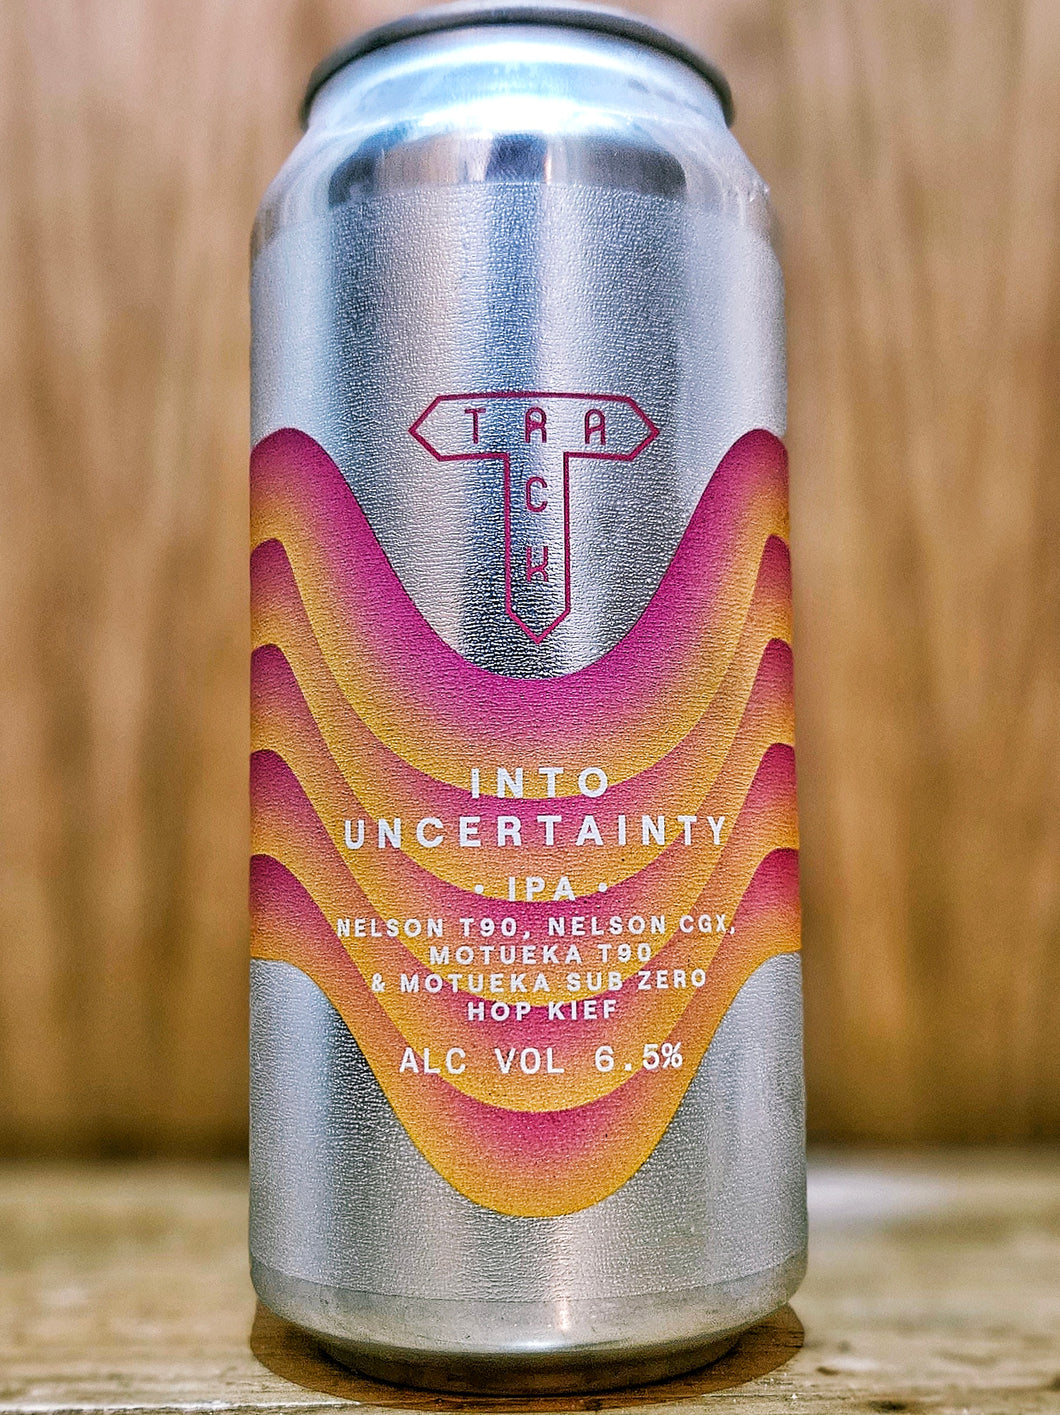 Track - Into Uncertainty